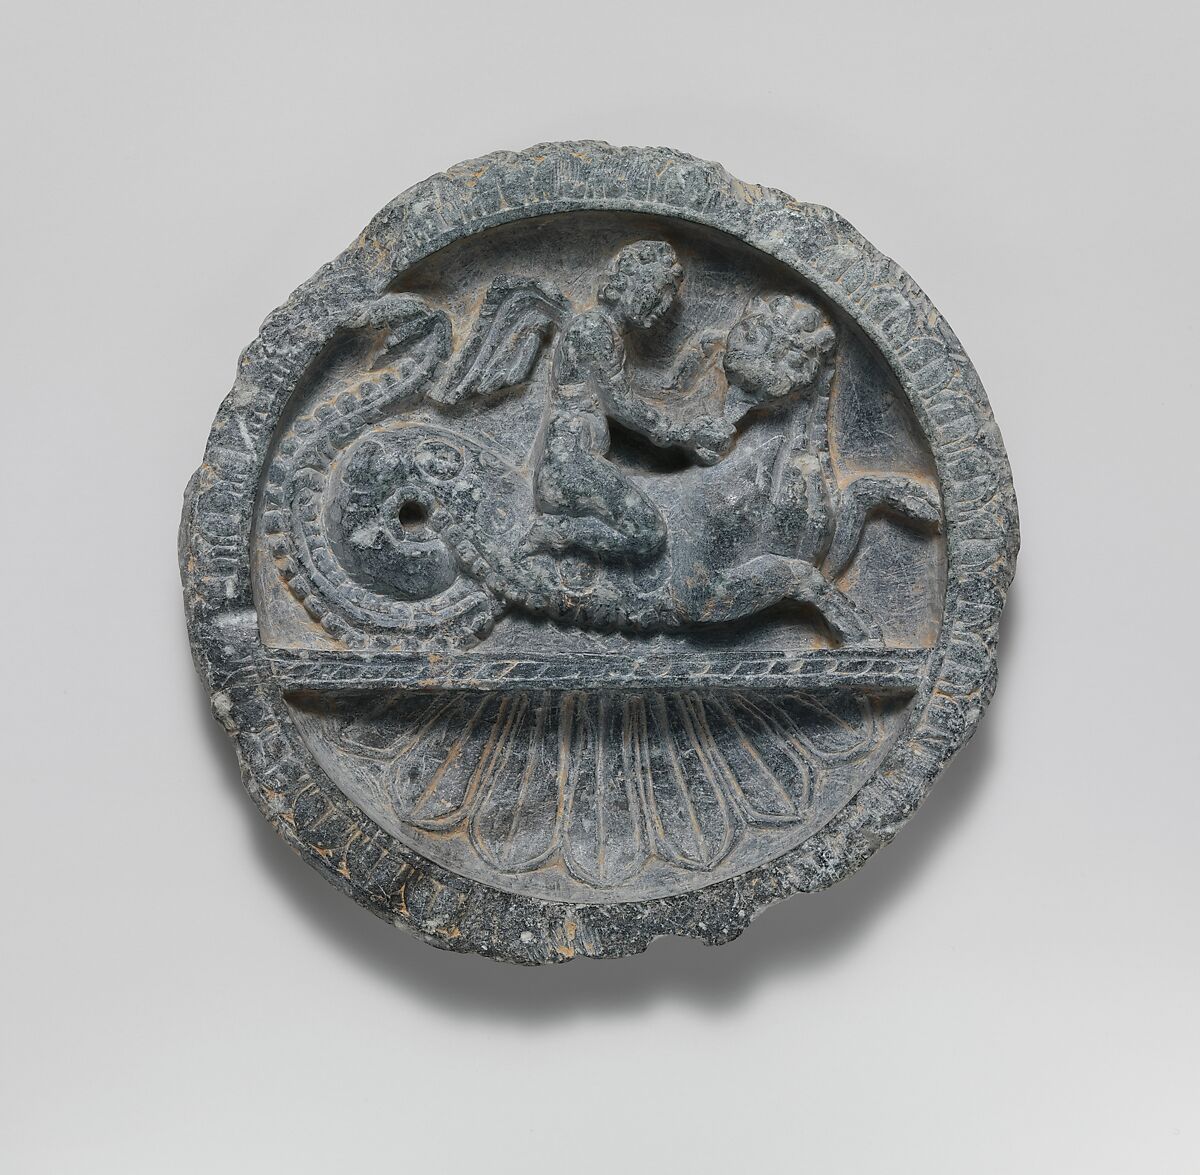 Dish with Winged Eros Riding a Lion-Headed Sea Monster, Schist, Pakistan (ancient region of Gandhara) 